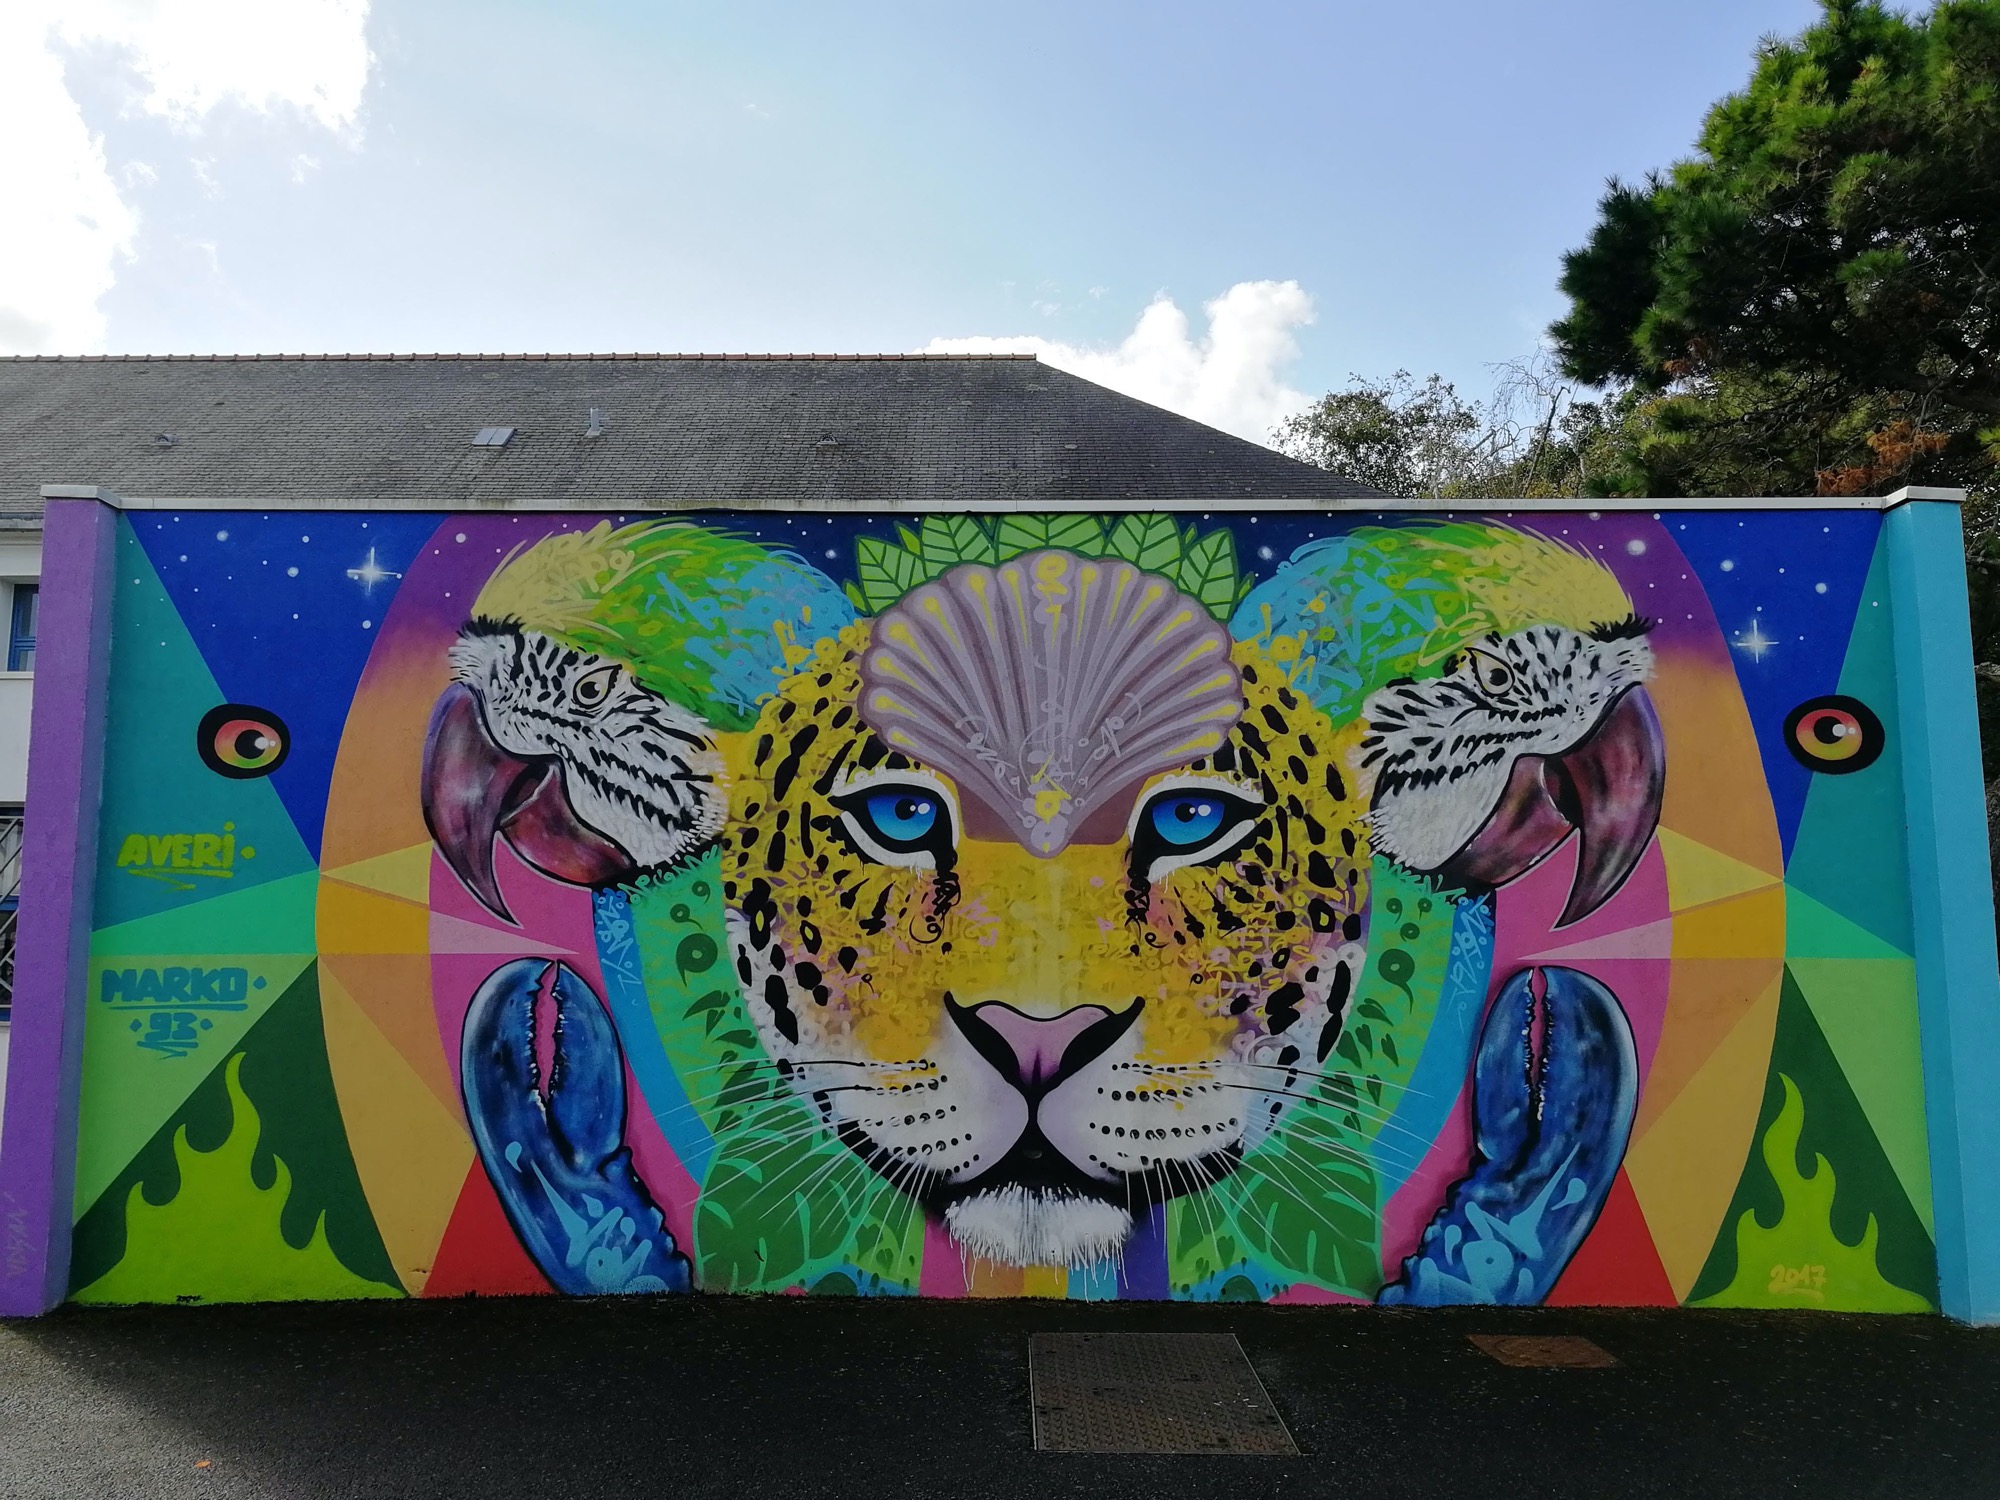 Graffiti 4448  by the artist Marko 93 captured by Rabot in Saint-Brieuc France